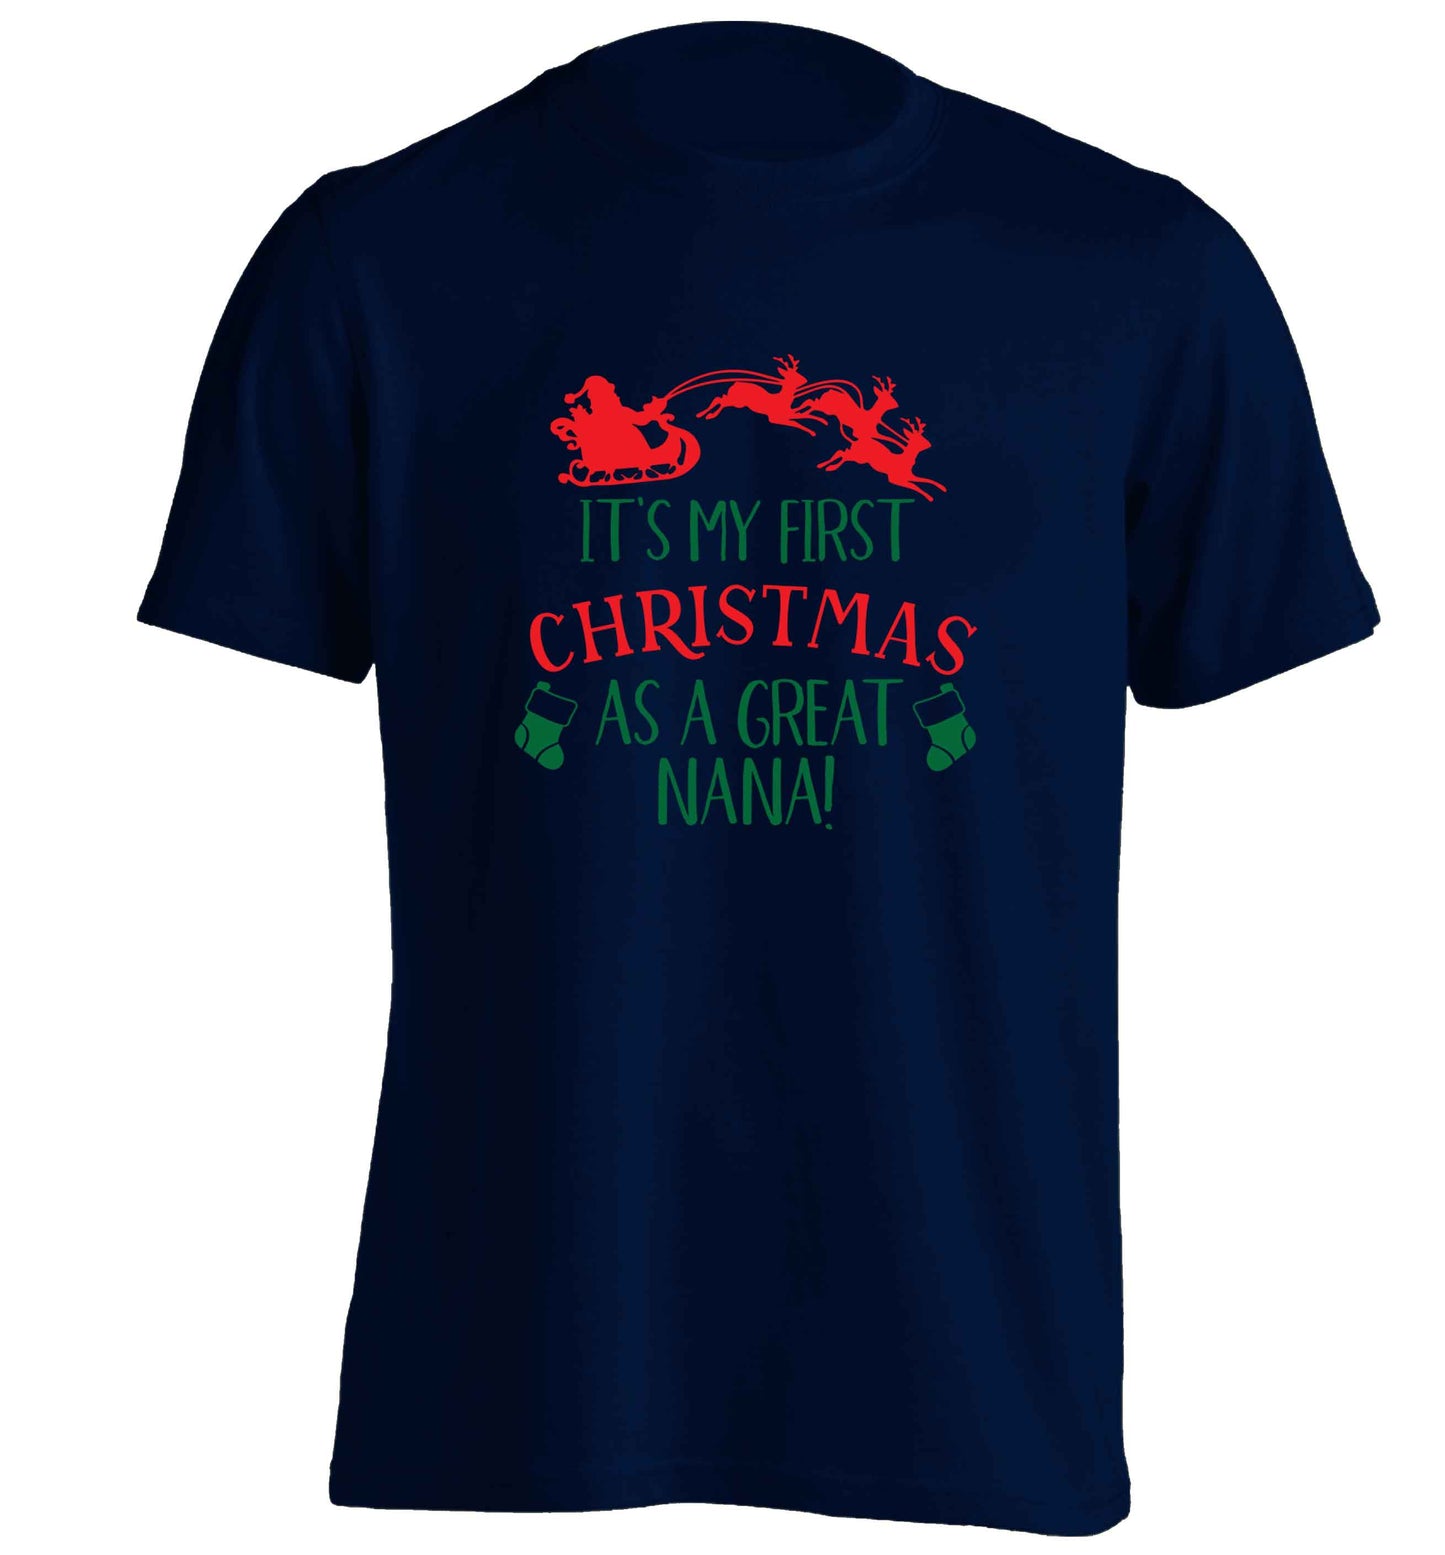 It's my first Christmas as a great nana! adults unisex navy Tshirt 2XL